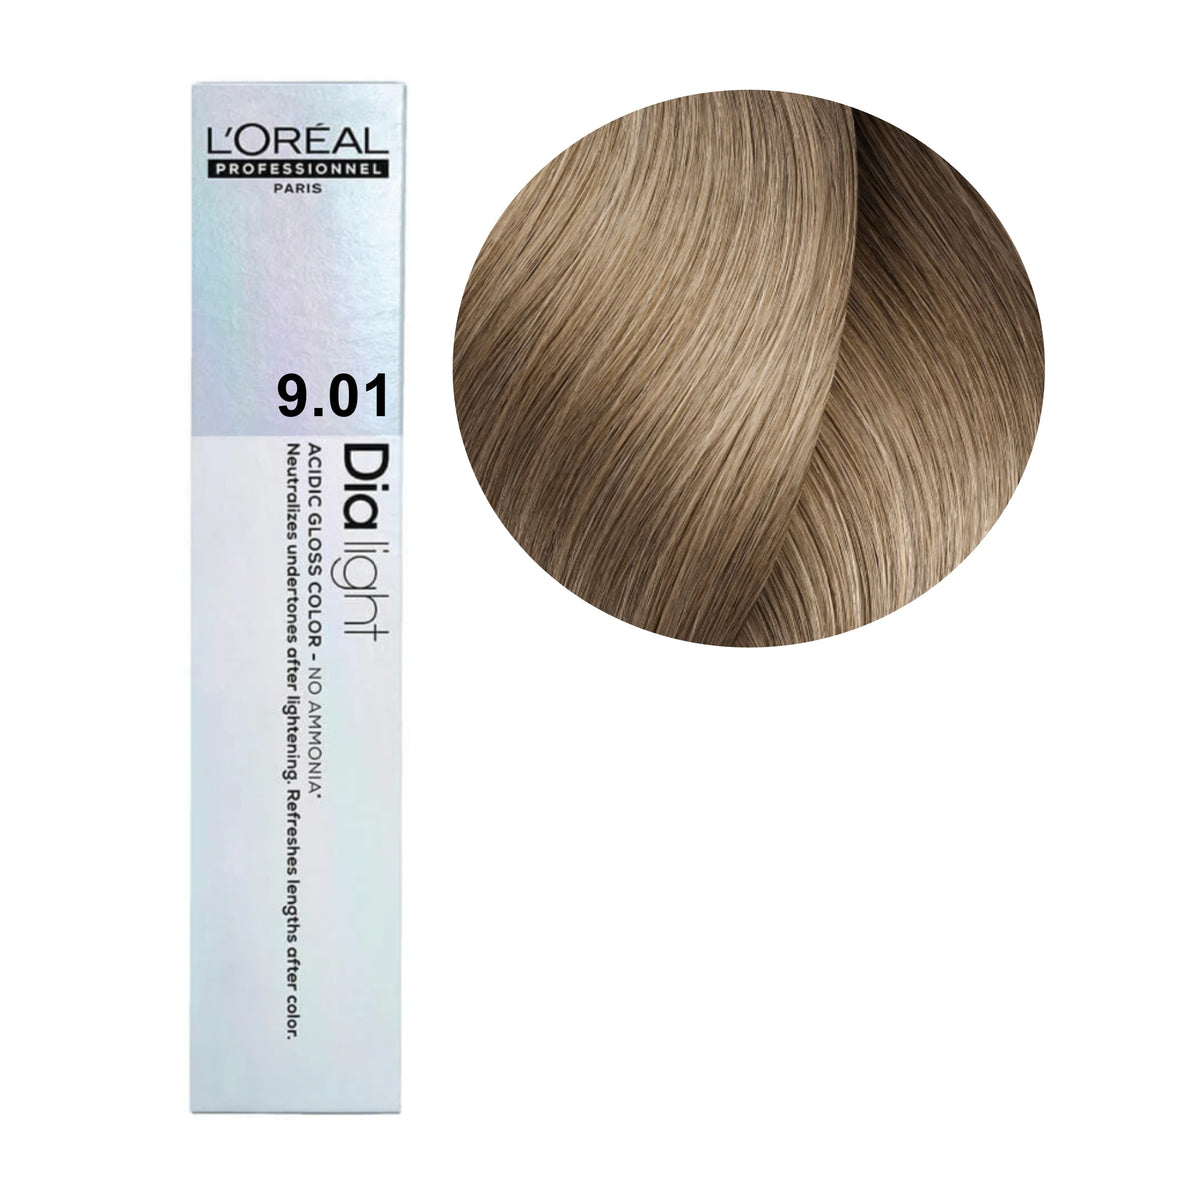 a tube of hair color on a white background